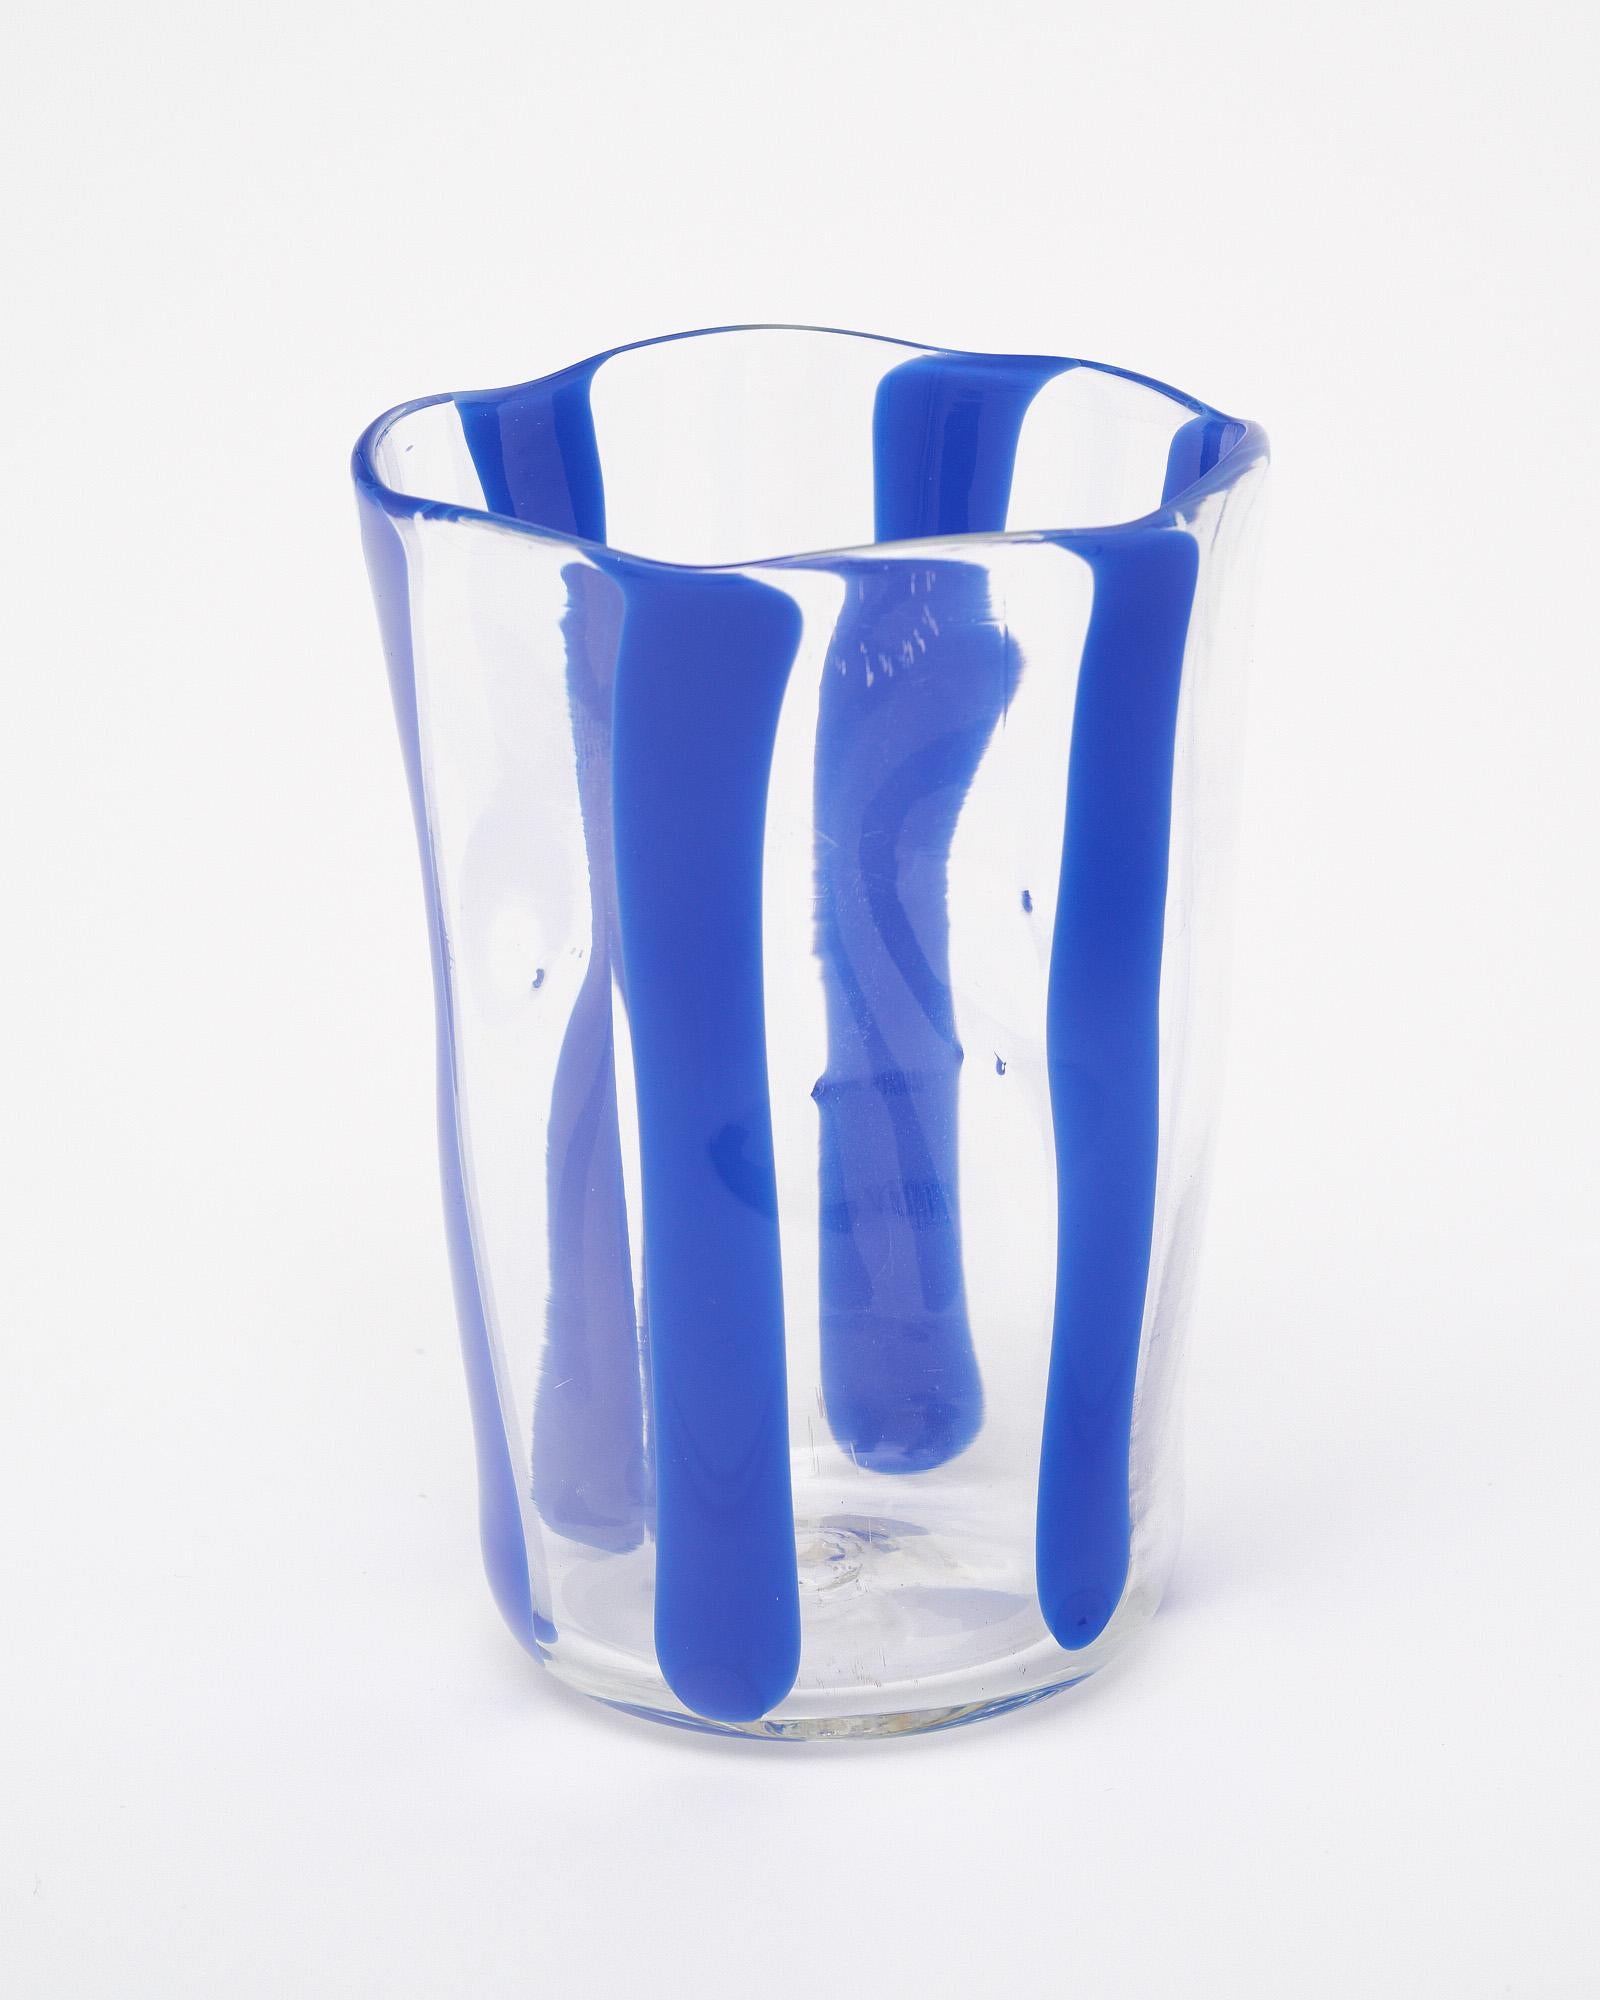 Murano Glass Cobalt Blue Carafe And Glasses In Excellent Condition For Sale In Austin, TX